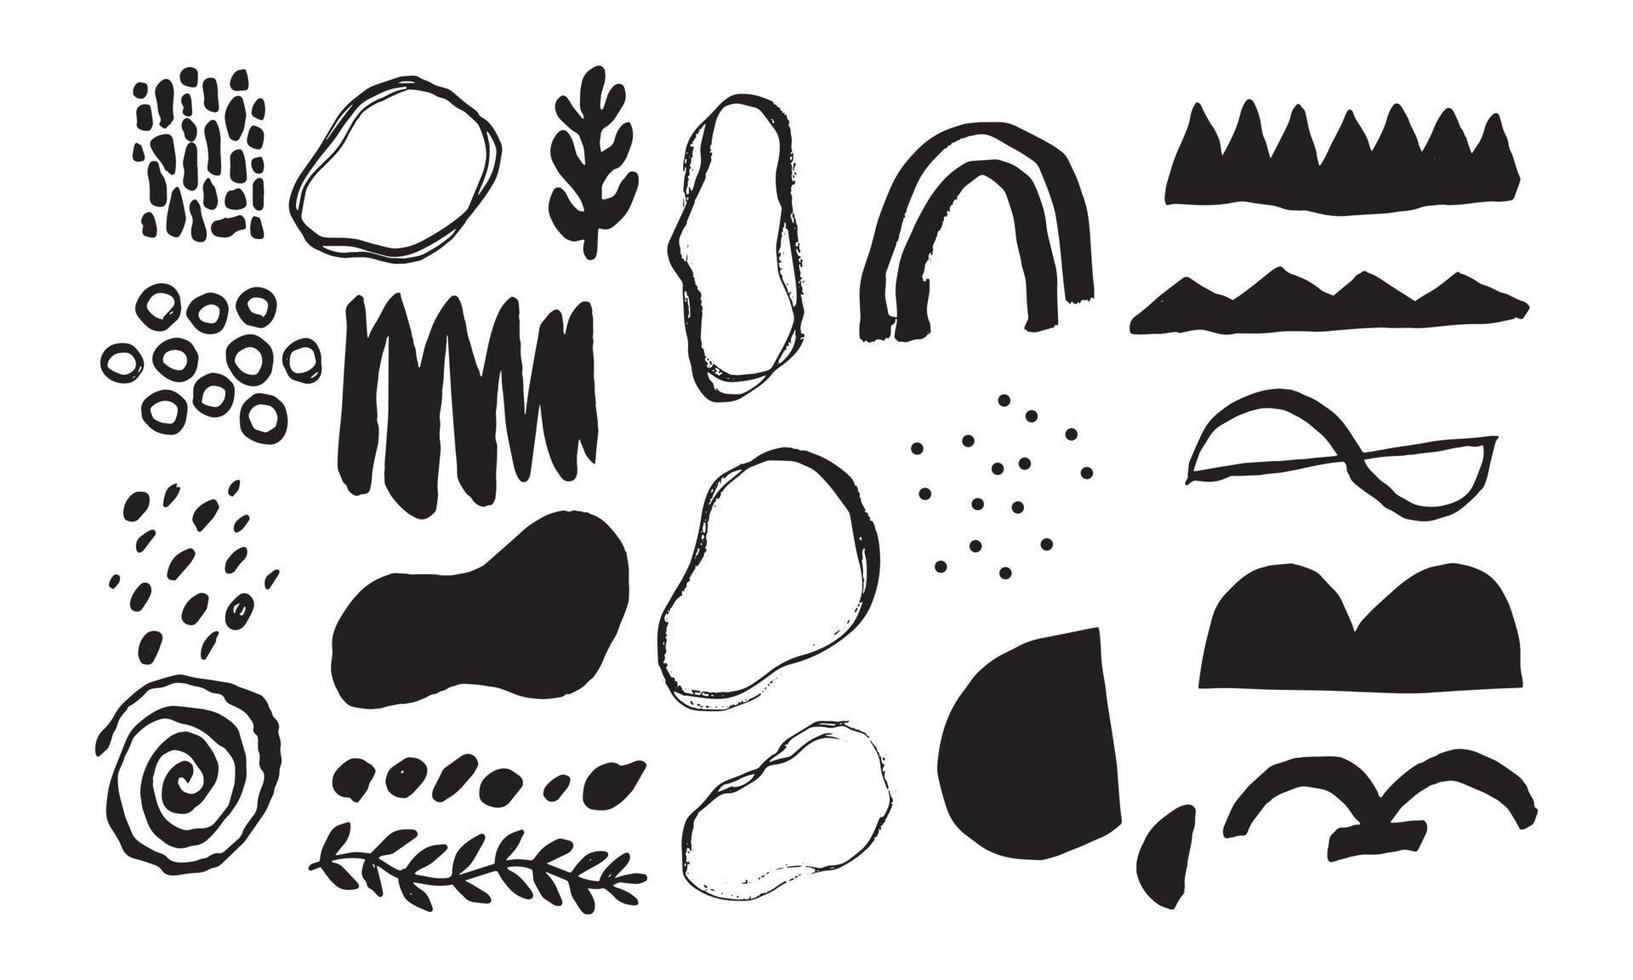 Hand drawn of various shape, stroke, and ocean doodle objects. Collection of Abstract contemporary modern trendy vector illustration.